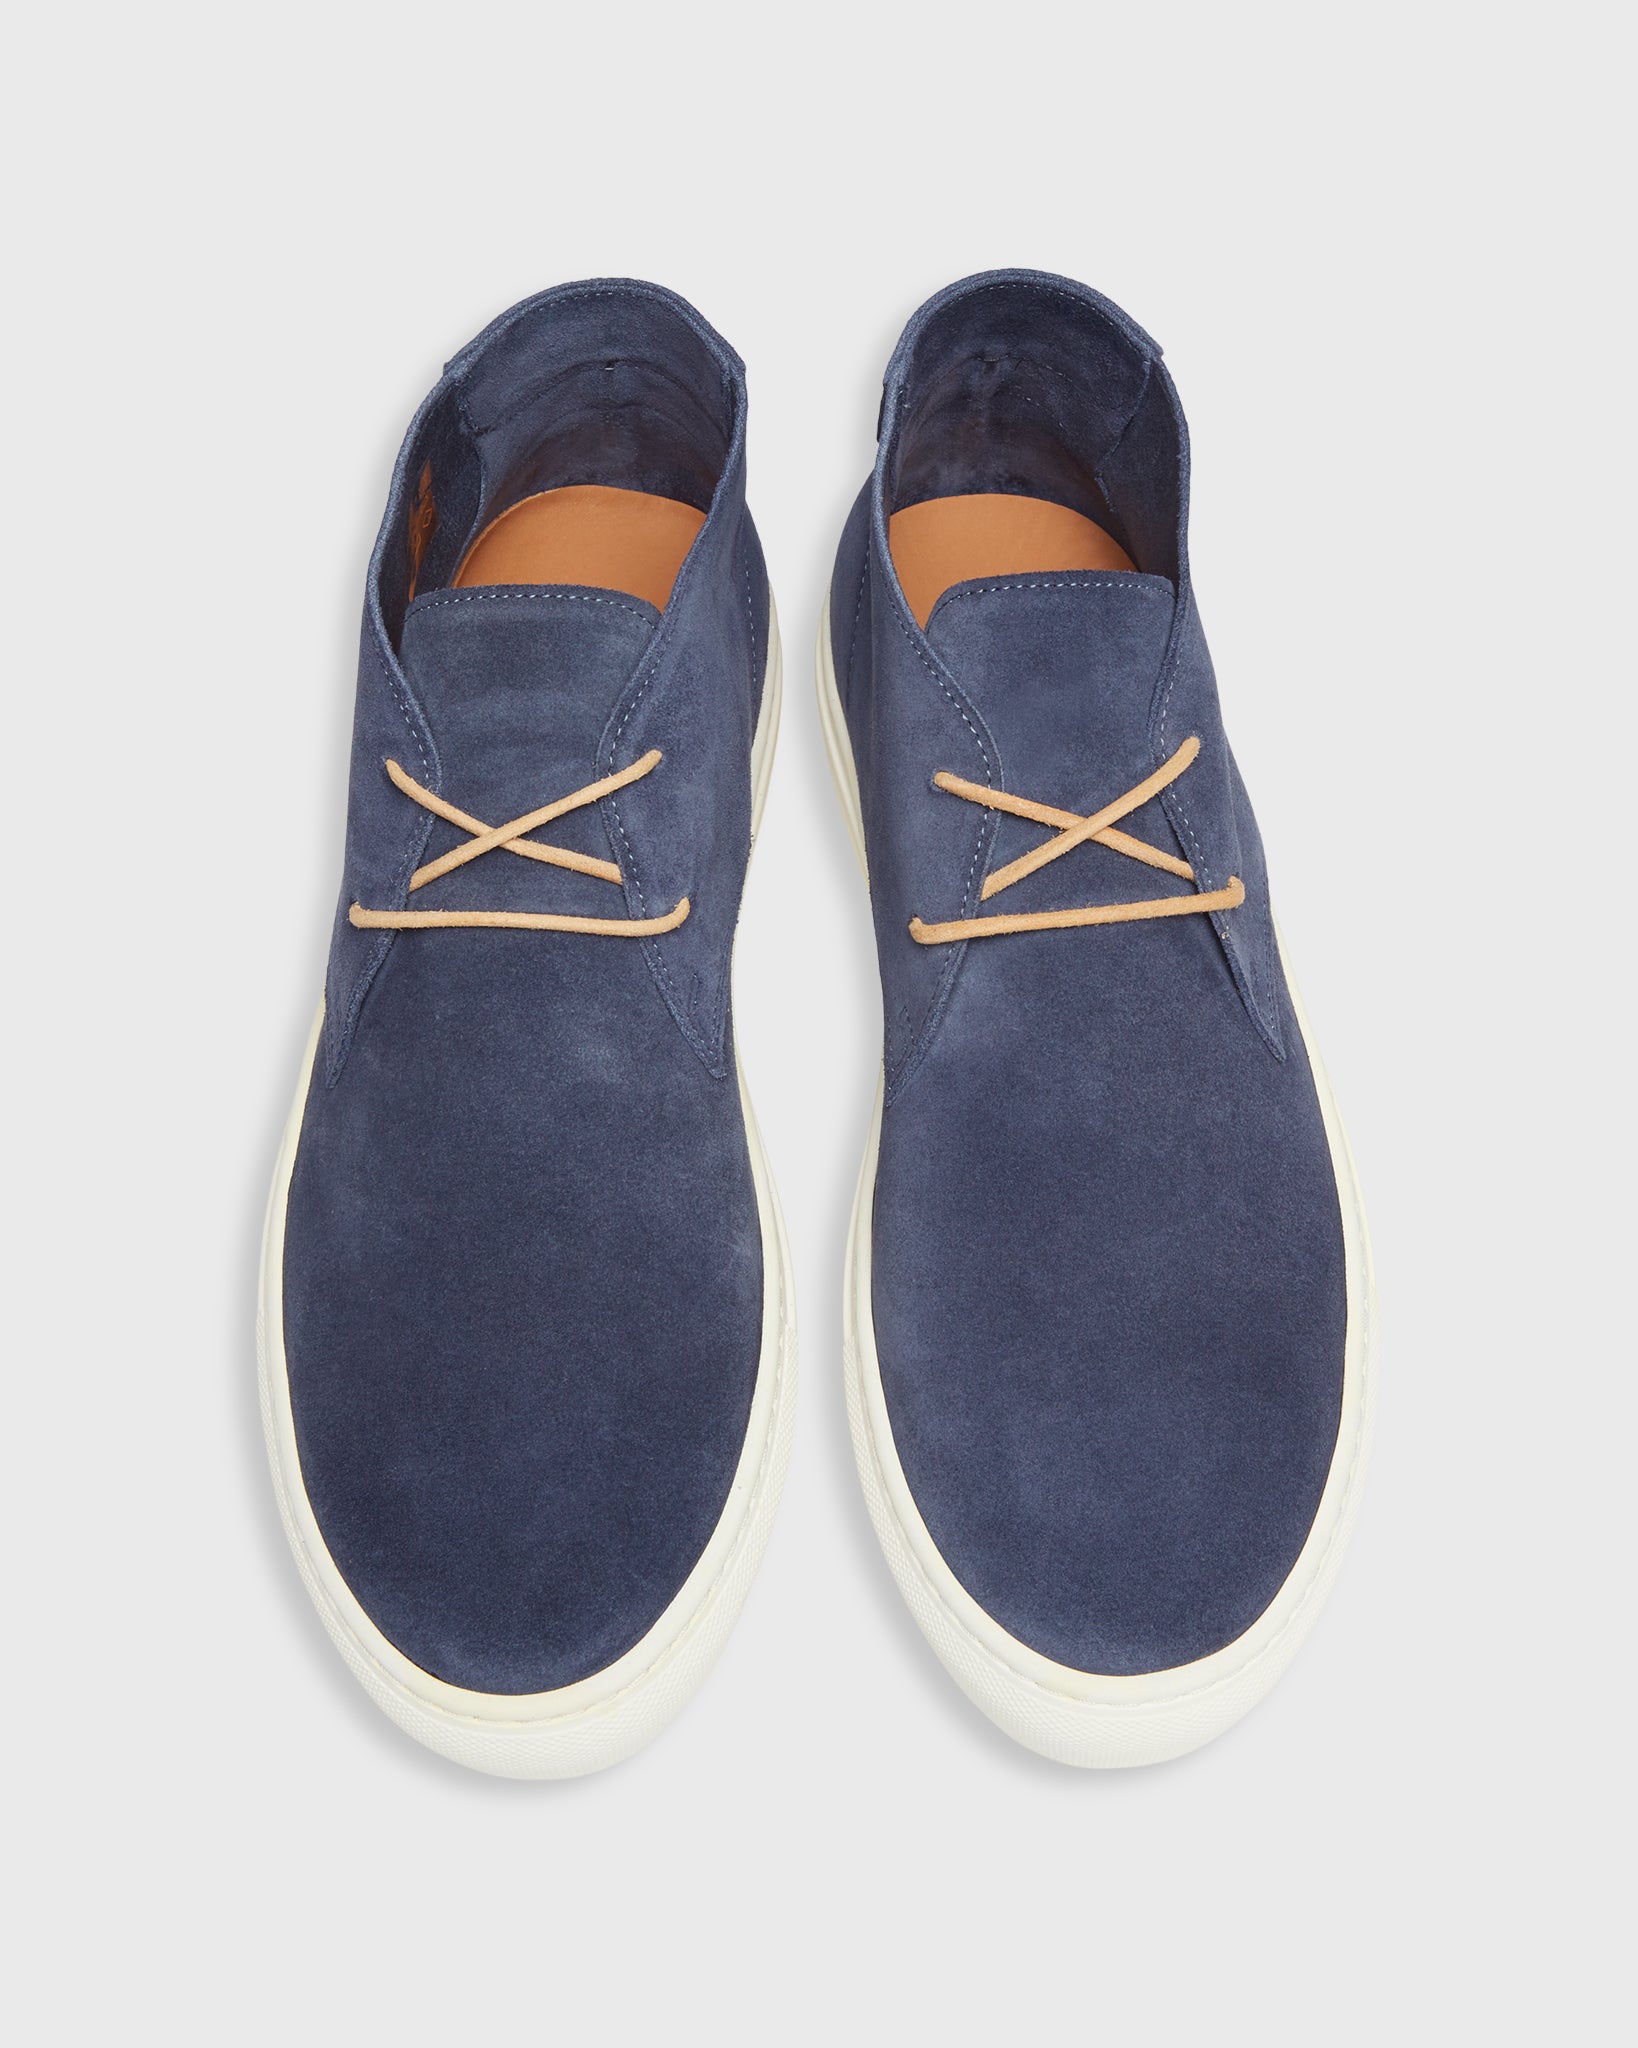 Chukka Lace-Up Sneaker in Pacific Blue Suede